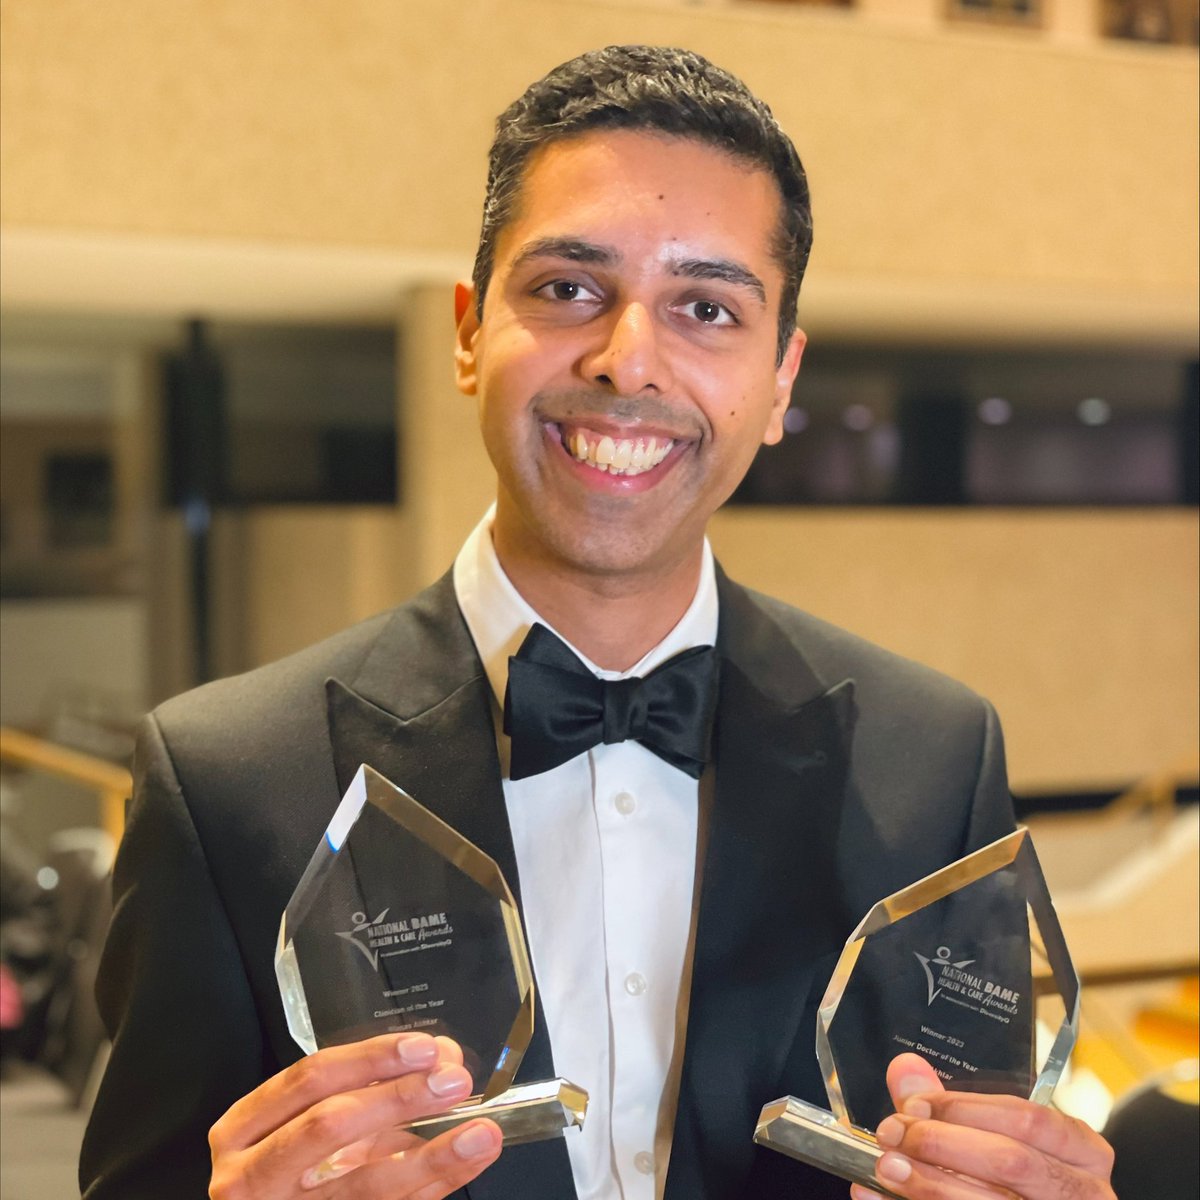 Huge congratulations to Waqas Akhtar who won two awards at the National BAME Health and Care awards last night! 🏆🏆 He was awarded clinician of the year and junior doctor of the year. 👏 #TeamGSTT #BAMEHCA2023